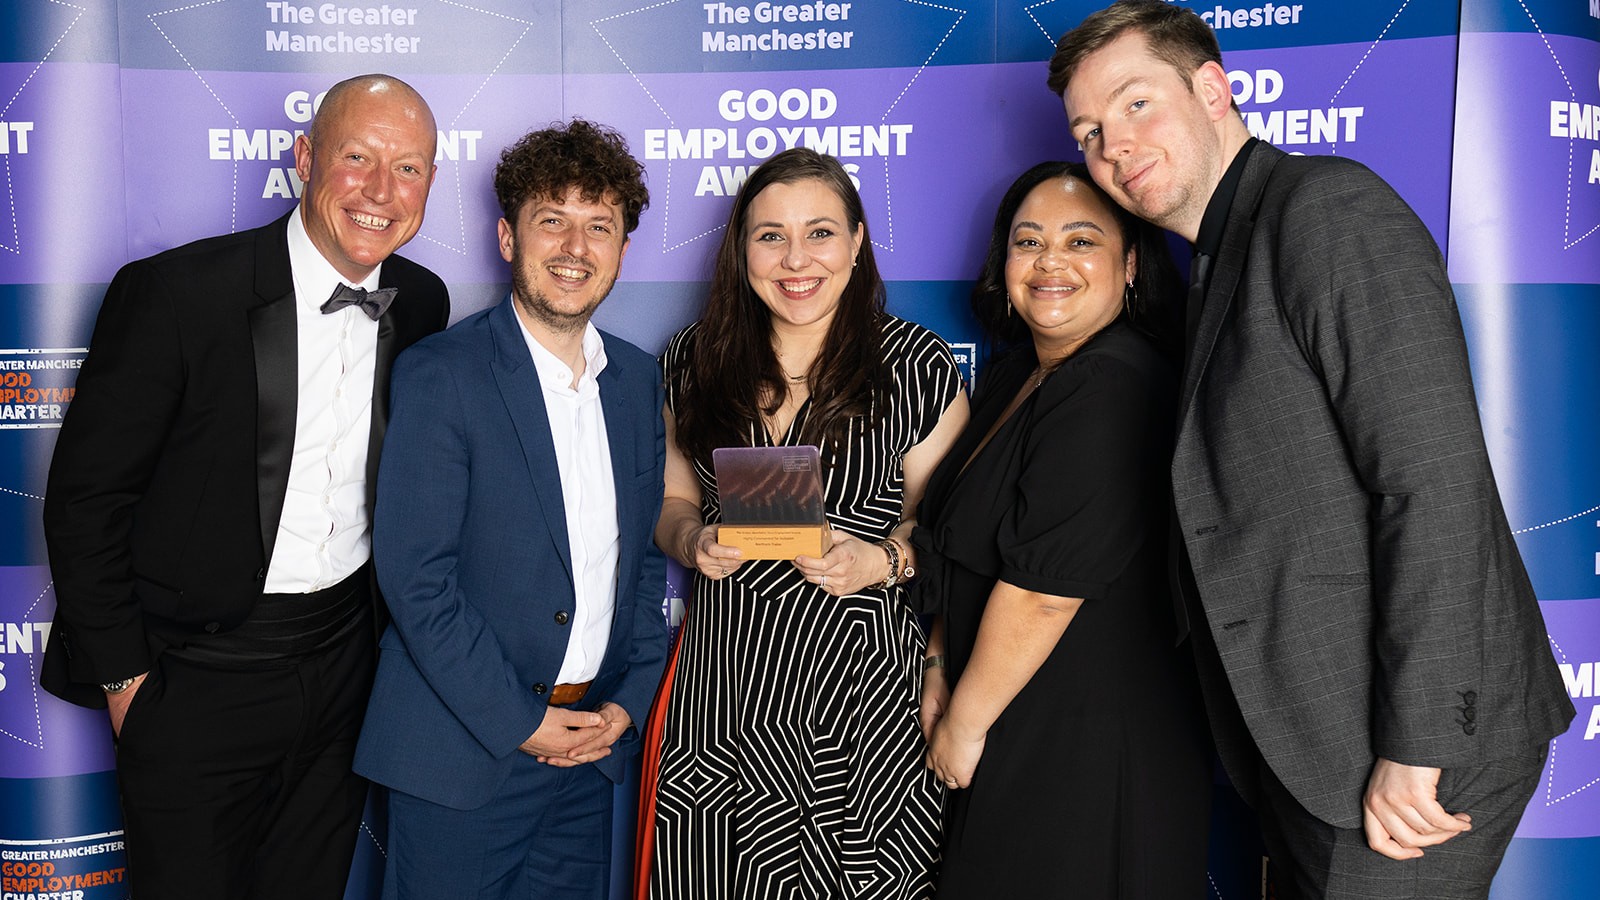 This image shows the Northern team holding their award